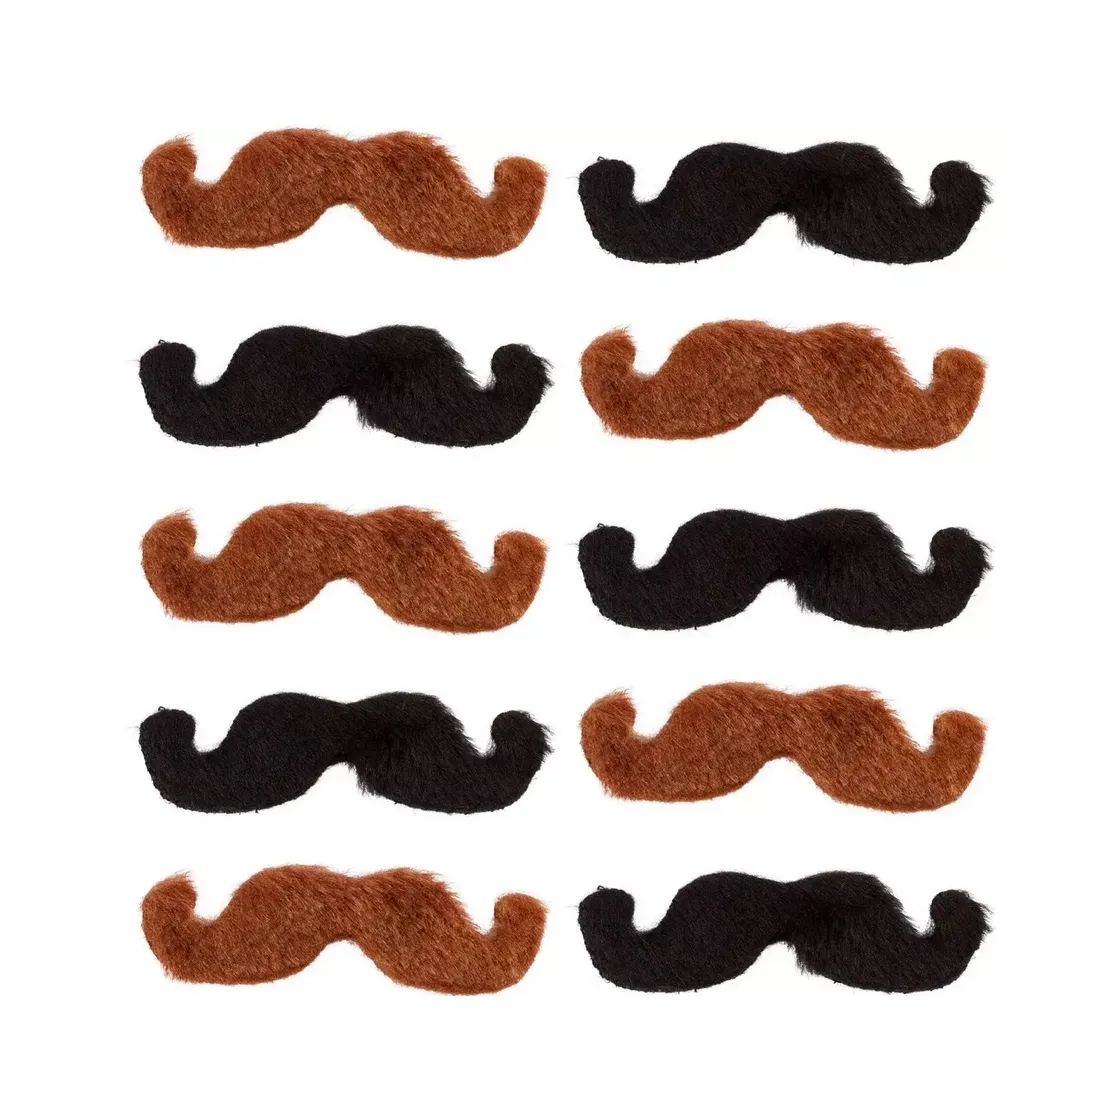 Cowboy Western Themed Party Exclusive Self-Adhesive Mustache Featuring Ten Styles of Black and Brown Mustaches